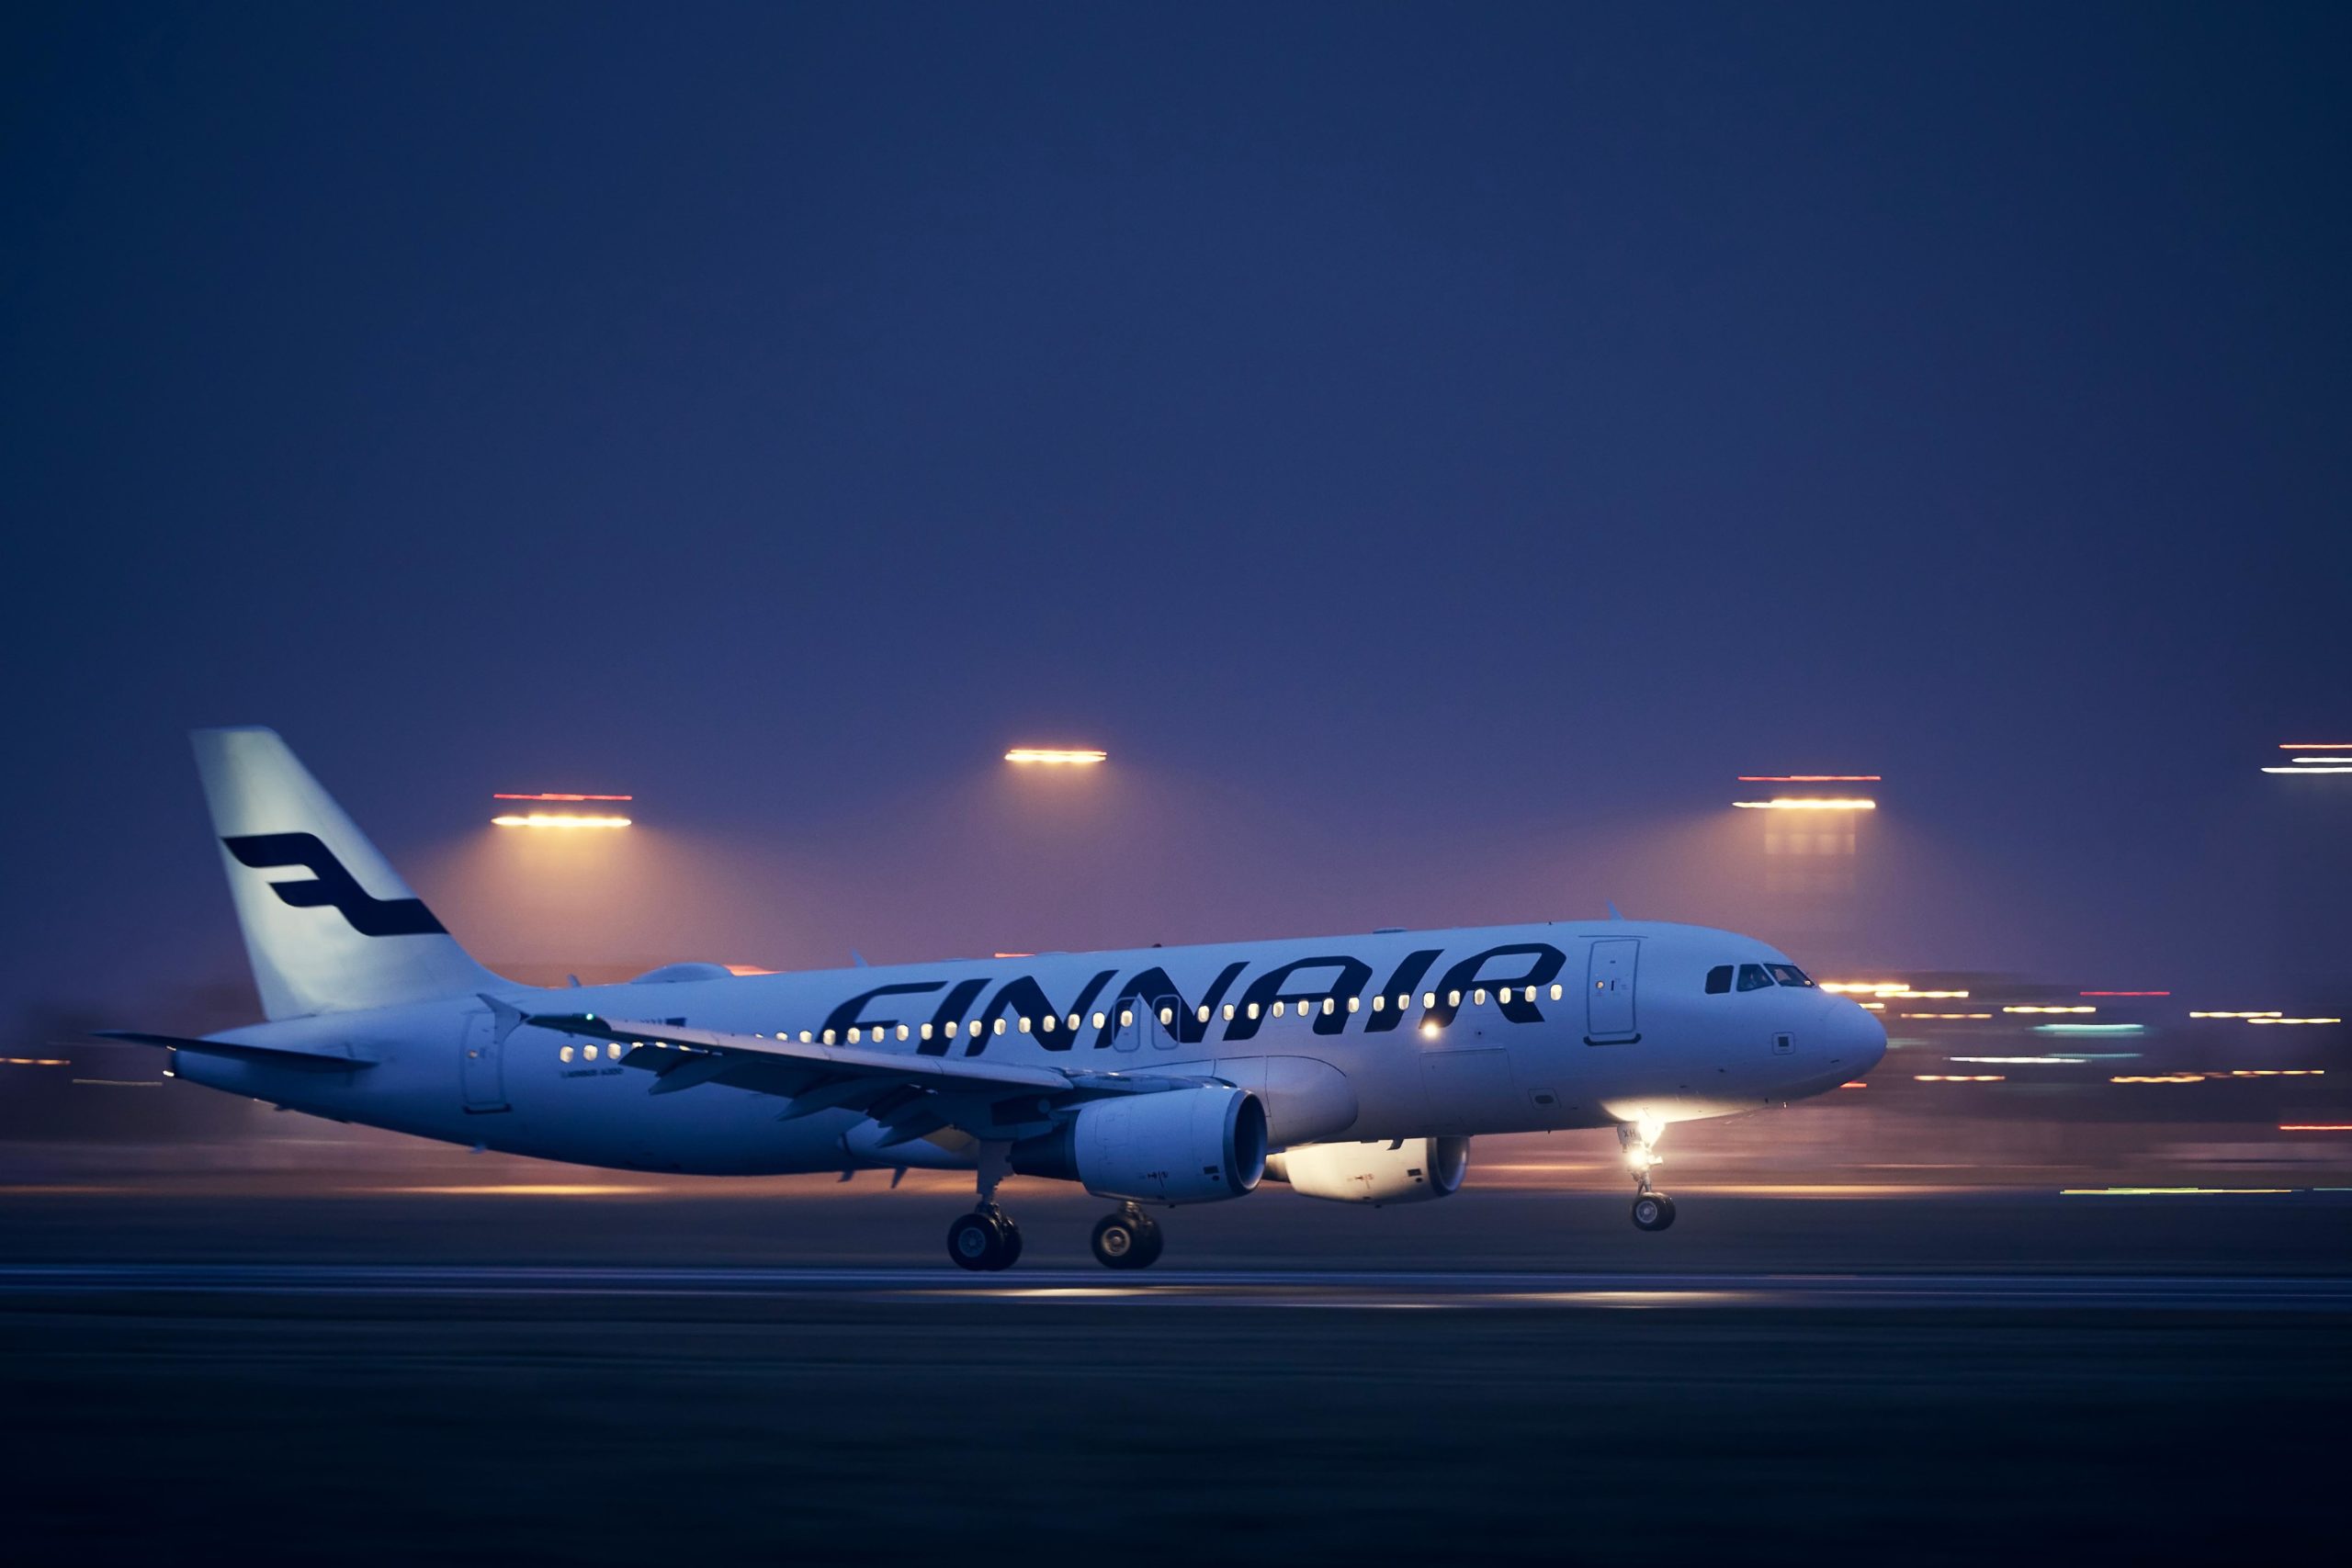 Finnair Airbus A320 passenger plane is landing on an airport in the evening. The airport lights in the background are blurred.